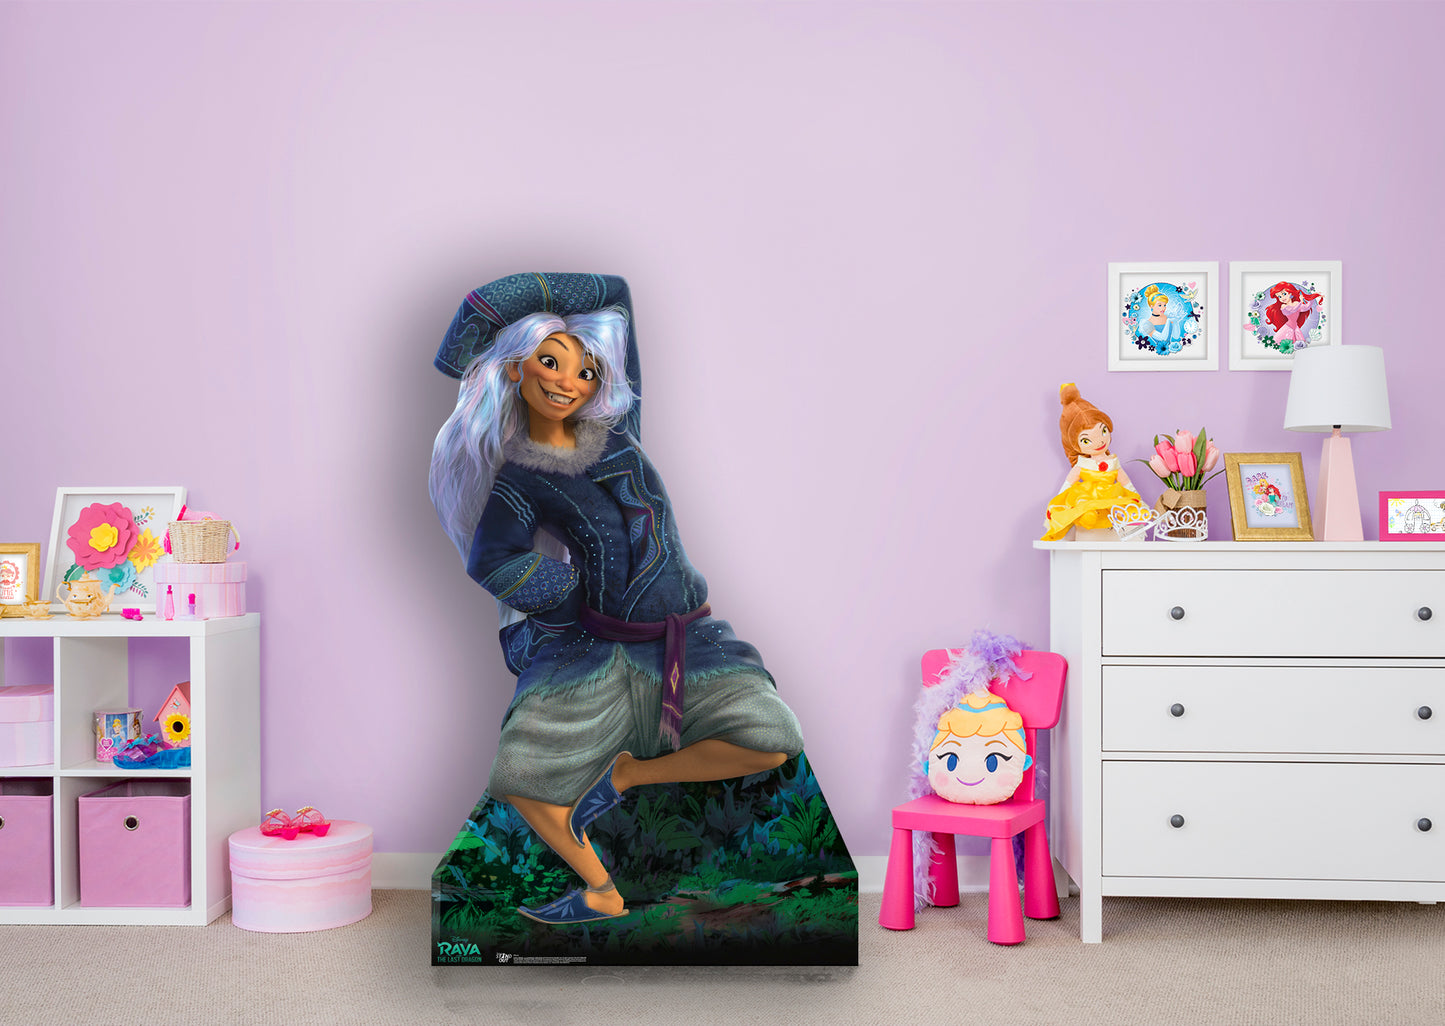 Raya and The Last Dragon: Sisu Human   Foam Core Cutout  - Officially Licensed Disney    Stand Out